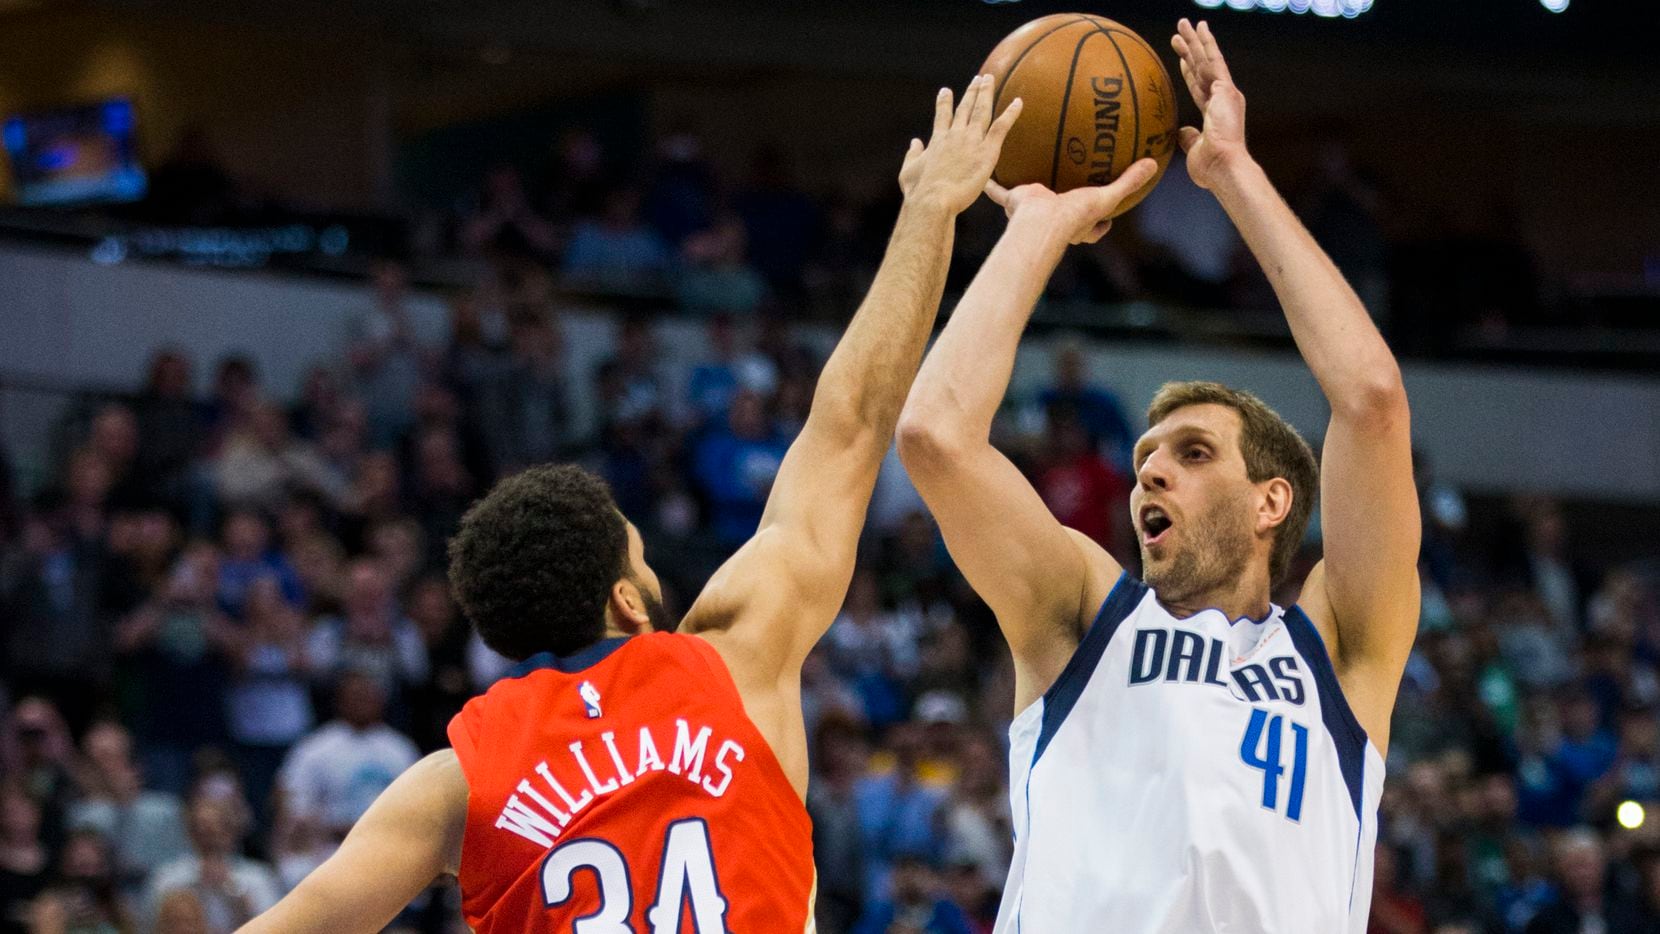 Dallas Mavericks forward Dirk Nowitzki (41) takes a shot to pass Wilt Chamberlain for the 6th NBA all-time scoring record during the first quarter of an NBA game between the Dallas Mavericks and the New Orleans Pelicans on Monday, March 18, 2019 at American Airlines Center in Dallas. (Ashley Landis/The Dallas Morning News)